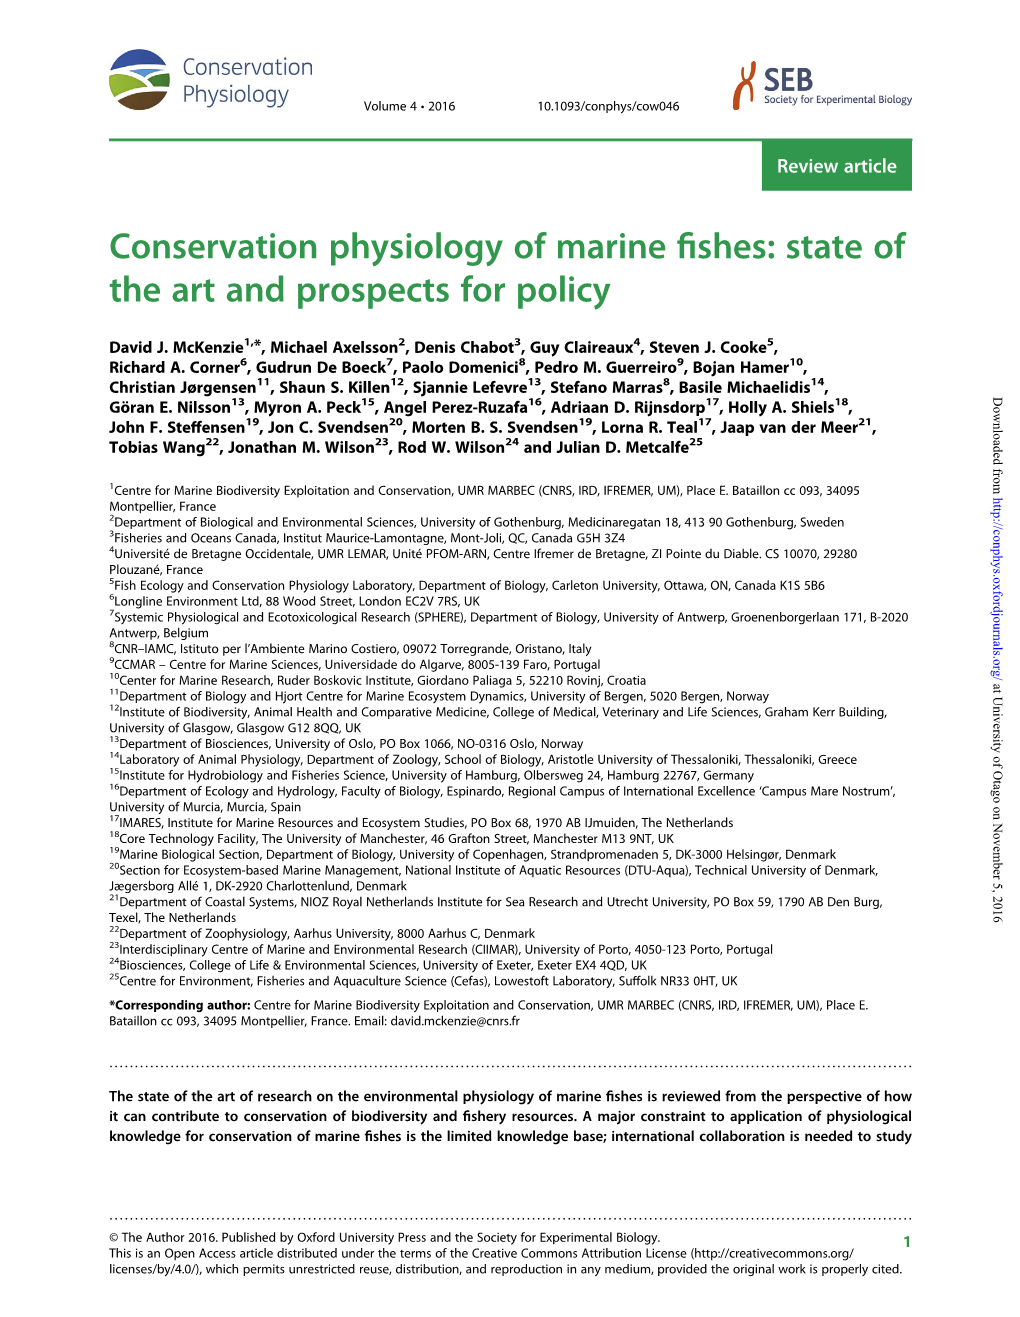 Conservation Physiology of Marine Fishes: State of the Art and Prospects